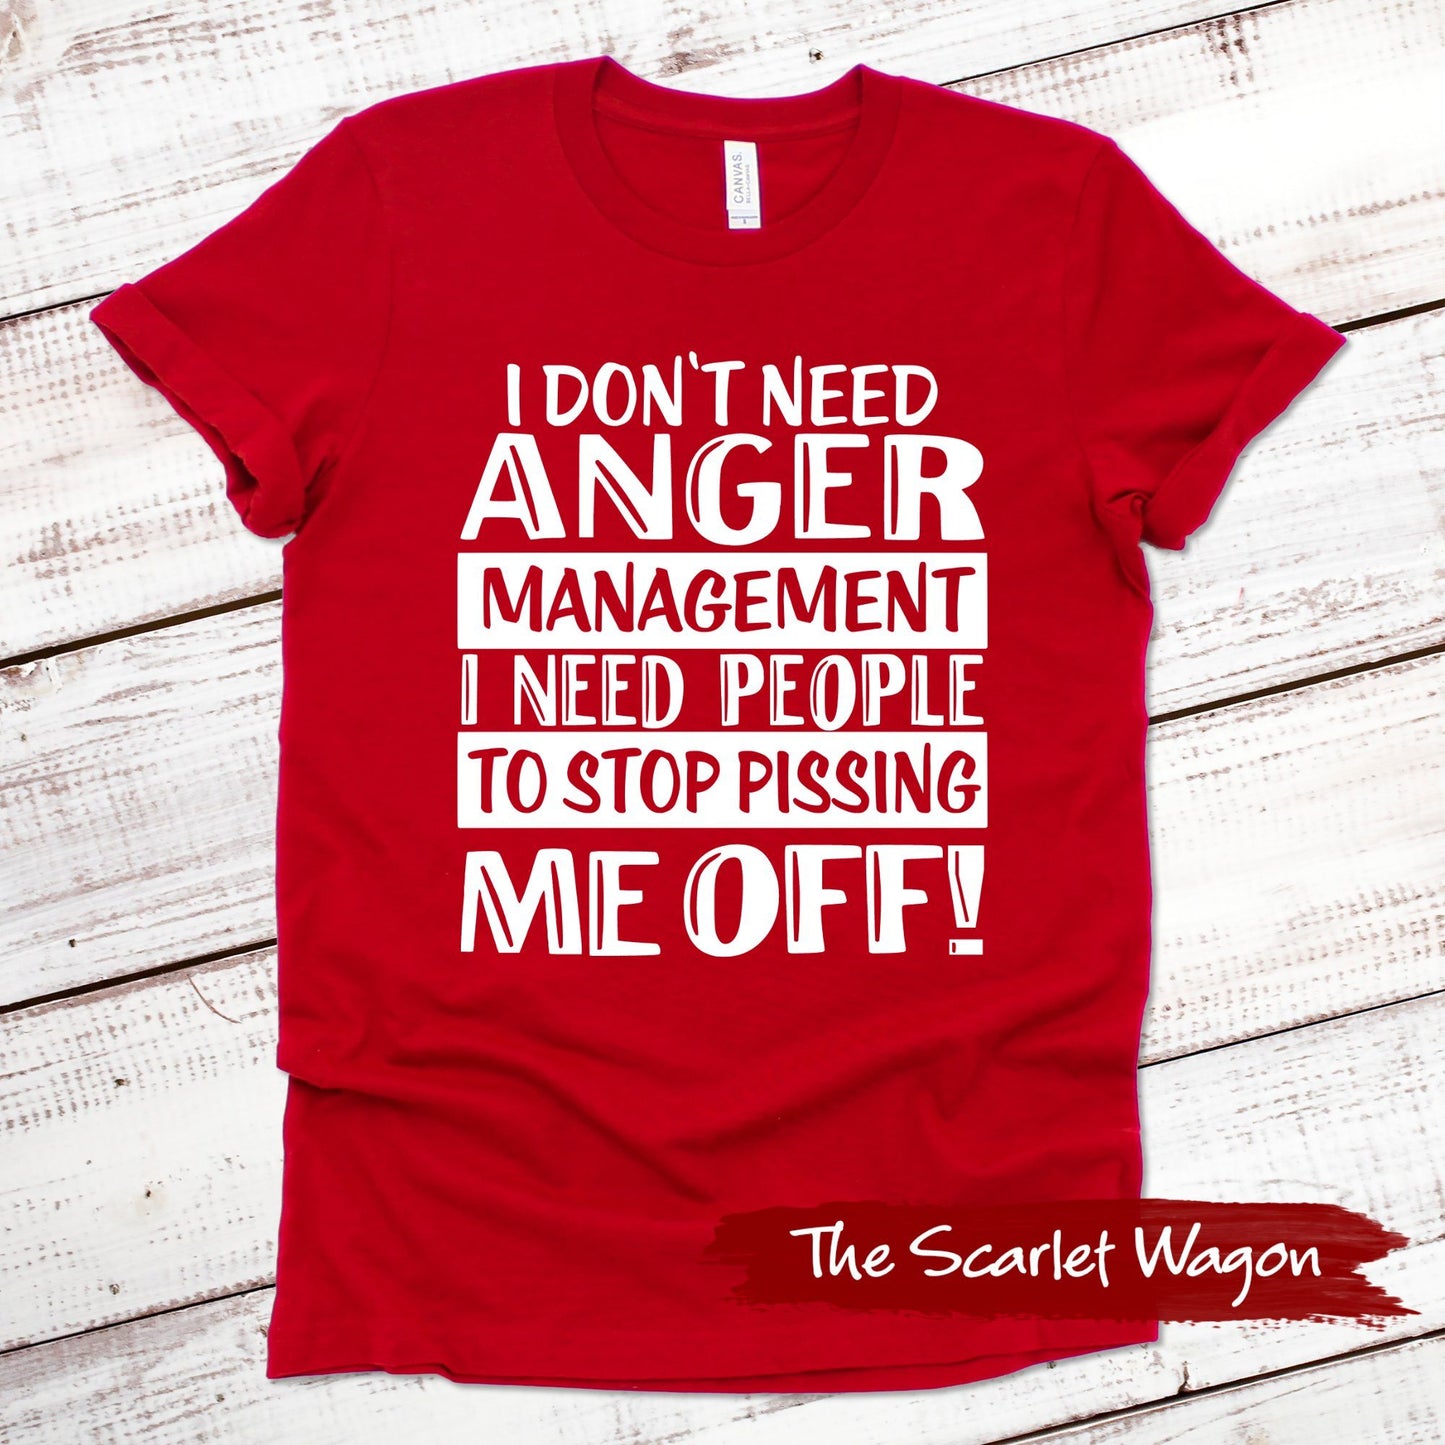 I Don't Need Anger Management Funny Shirt Scarlet Wagon Red XS 